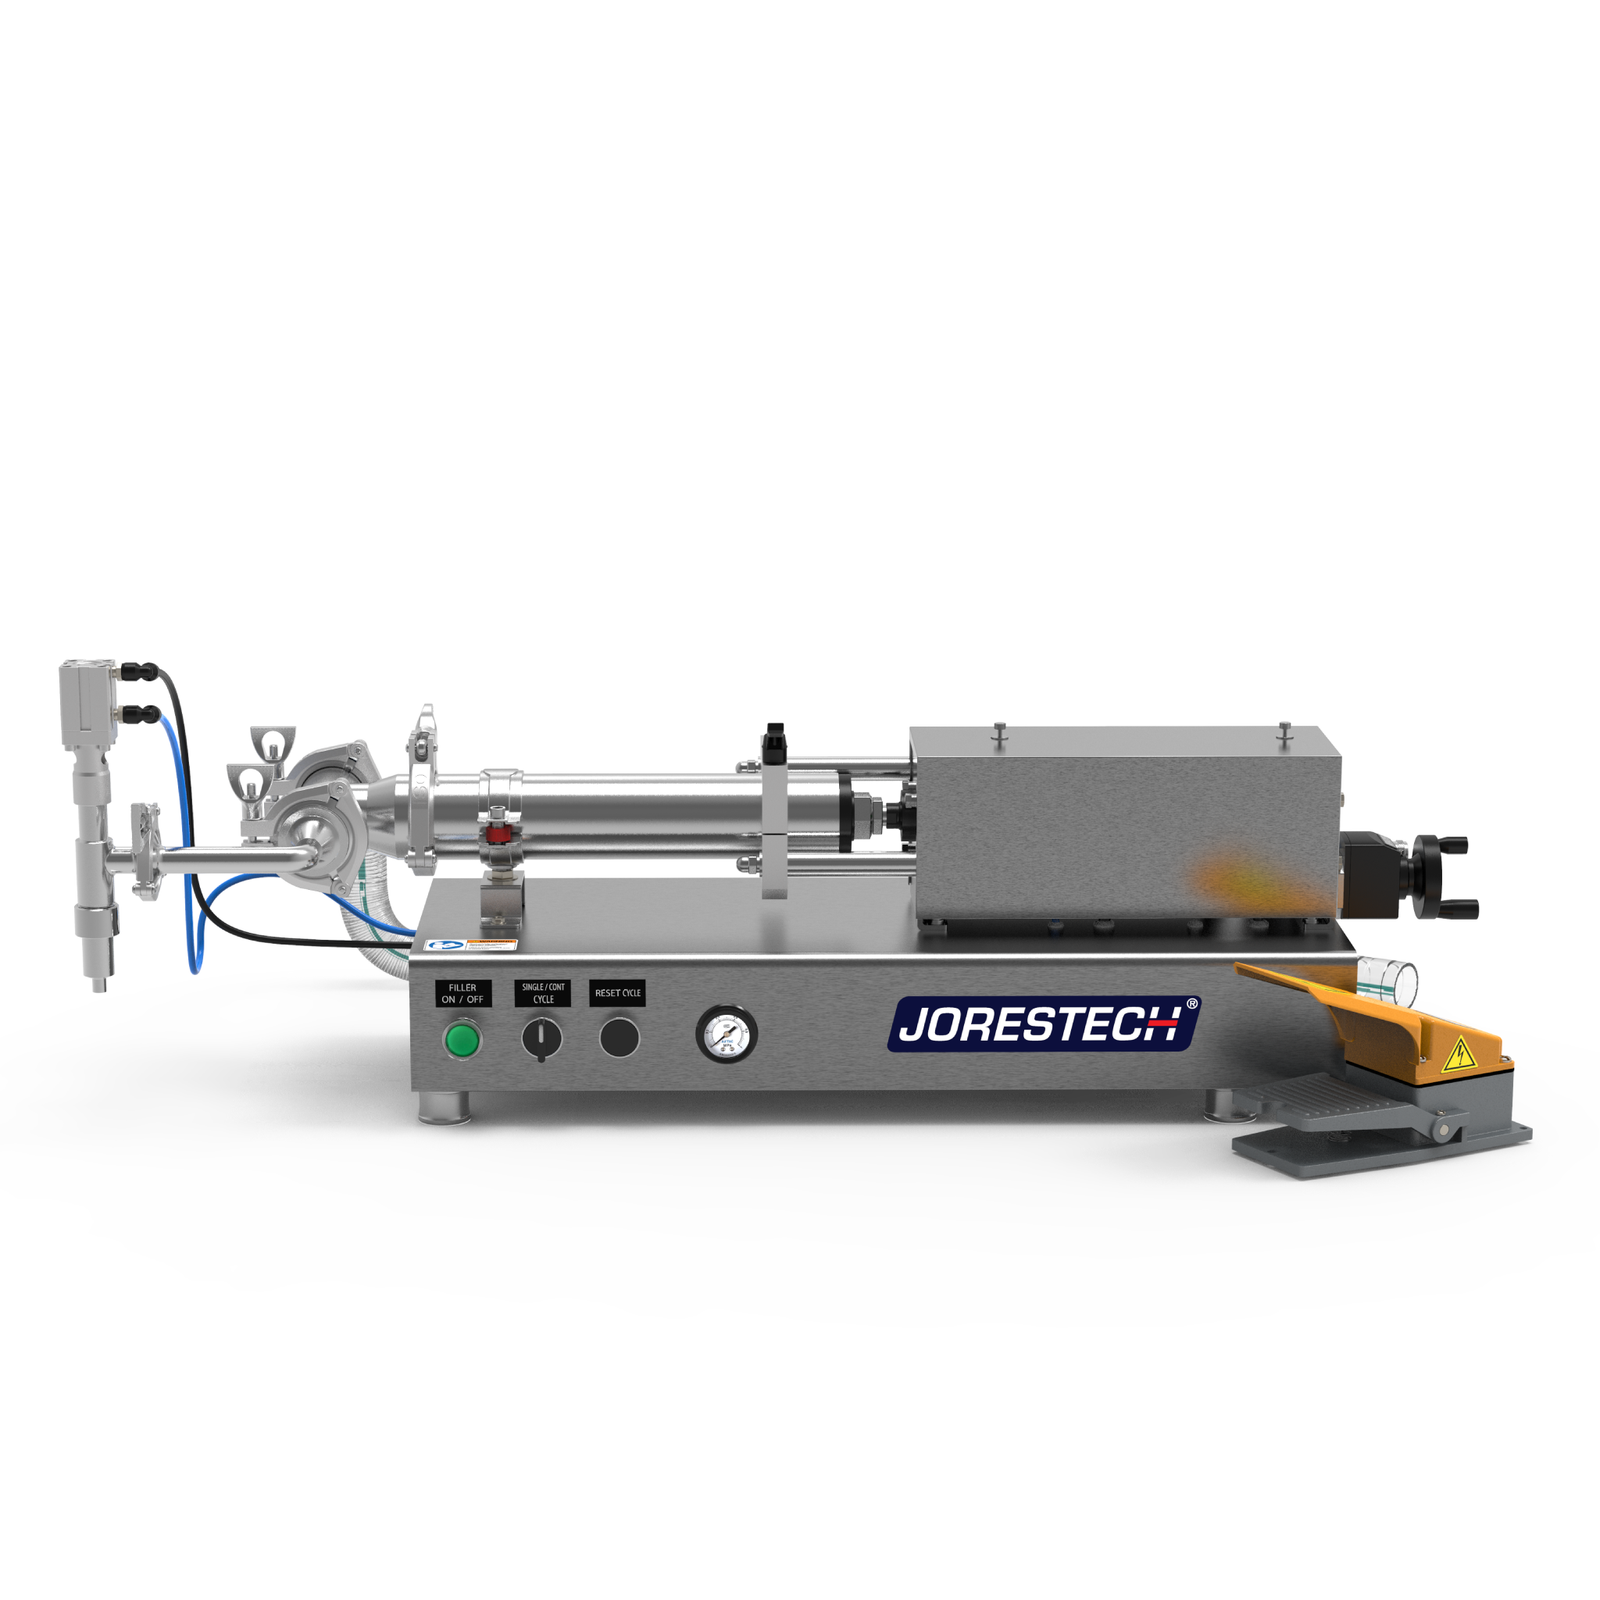 The stainless steel low viscosity JORES TECHNOLOGIES® piston filling machine in a frontal view. The piston filler is made out of stainless steel and there's a yellow and grey foot pedal resting on the side.